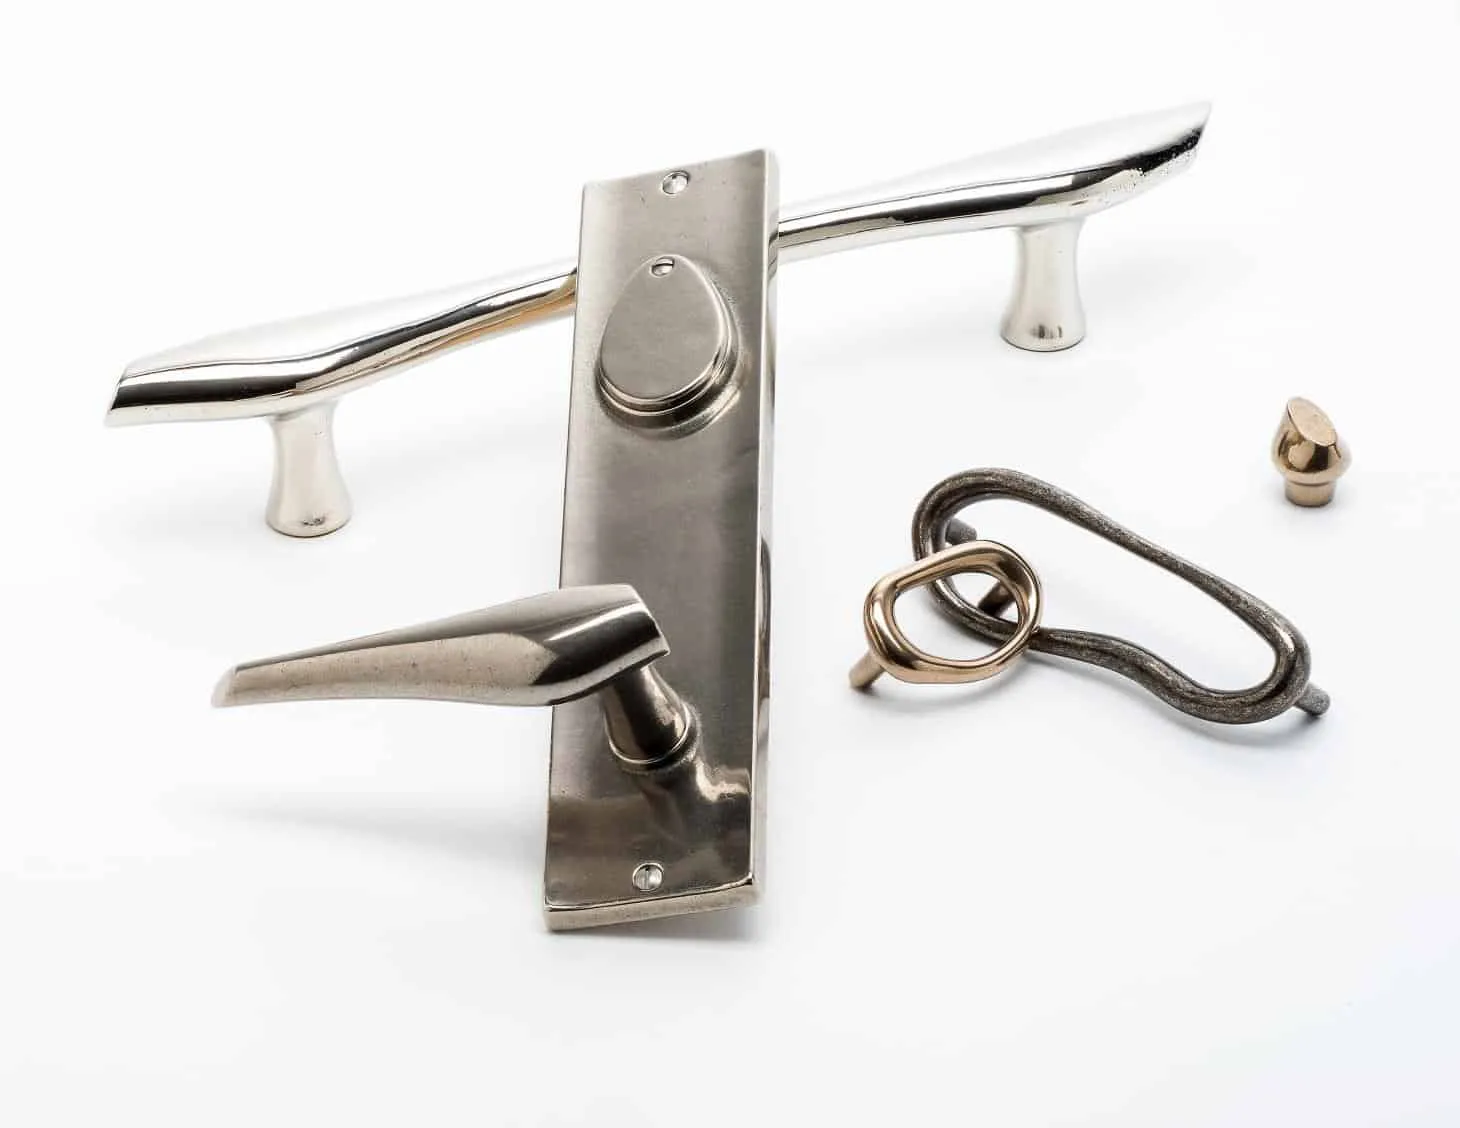 door hardware & fitting accessories for all sliding and hinged doors